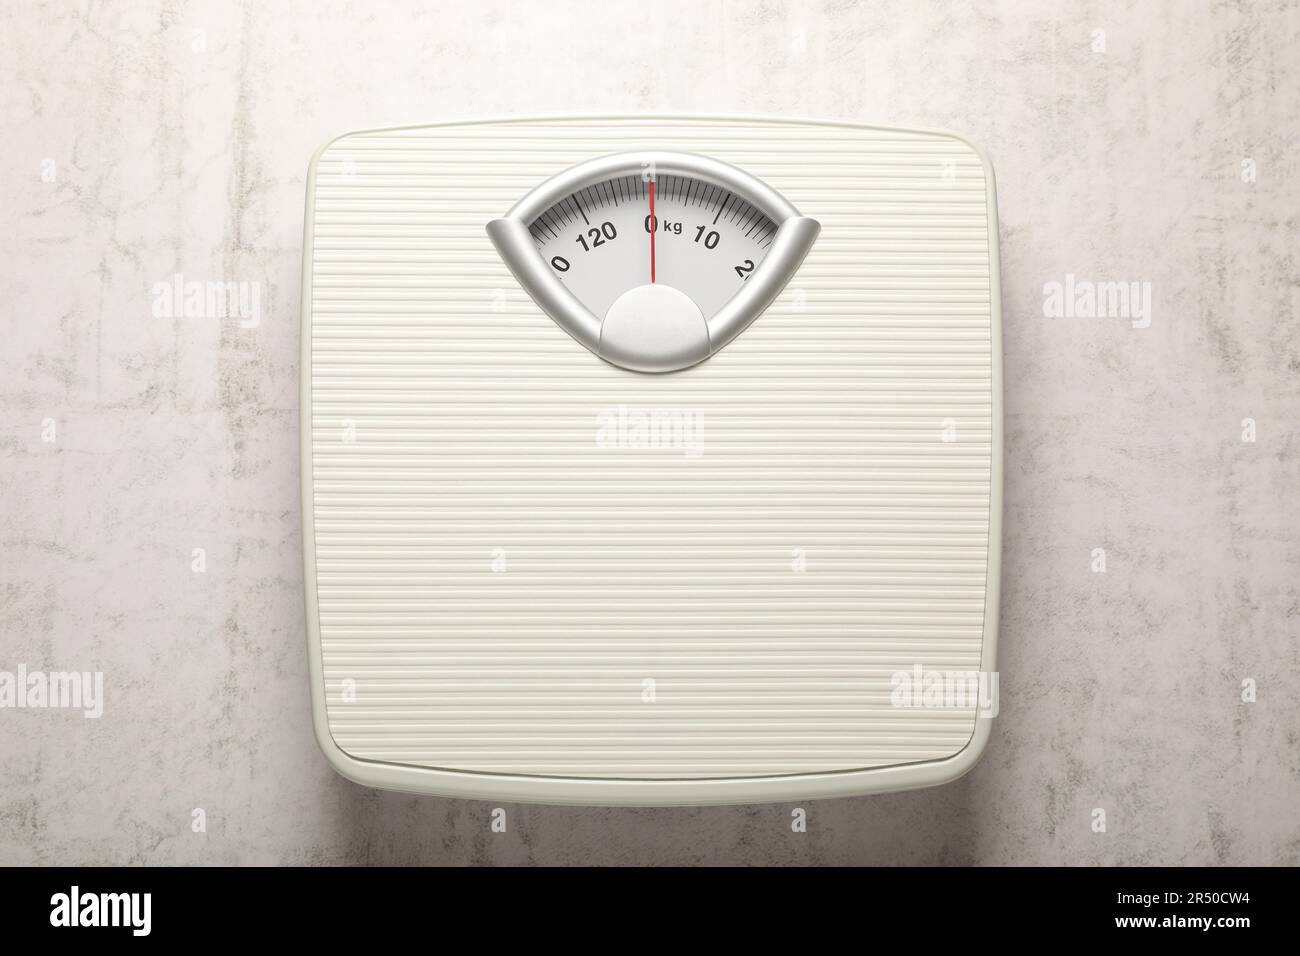 https://c8.alamy.com/comp/2R50CW4/weigh-scales-on-white-textured-background-top-view-overweight-concept-2R50CW4.jpg